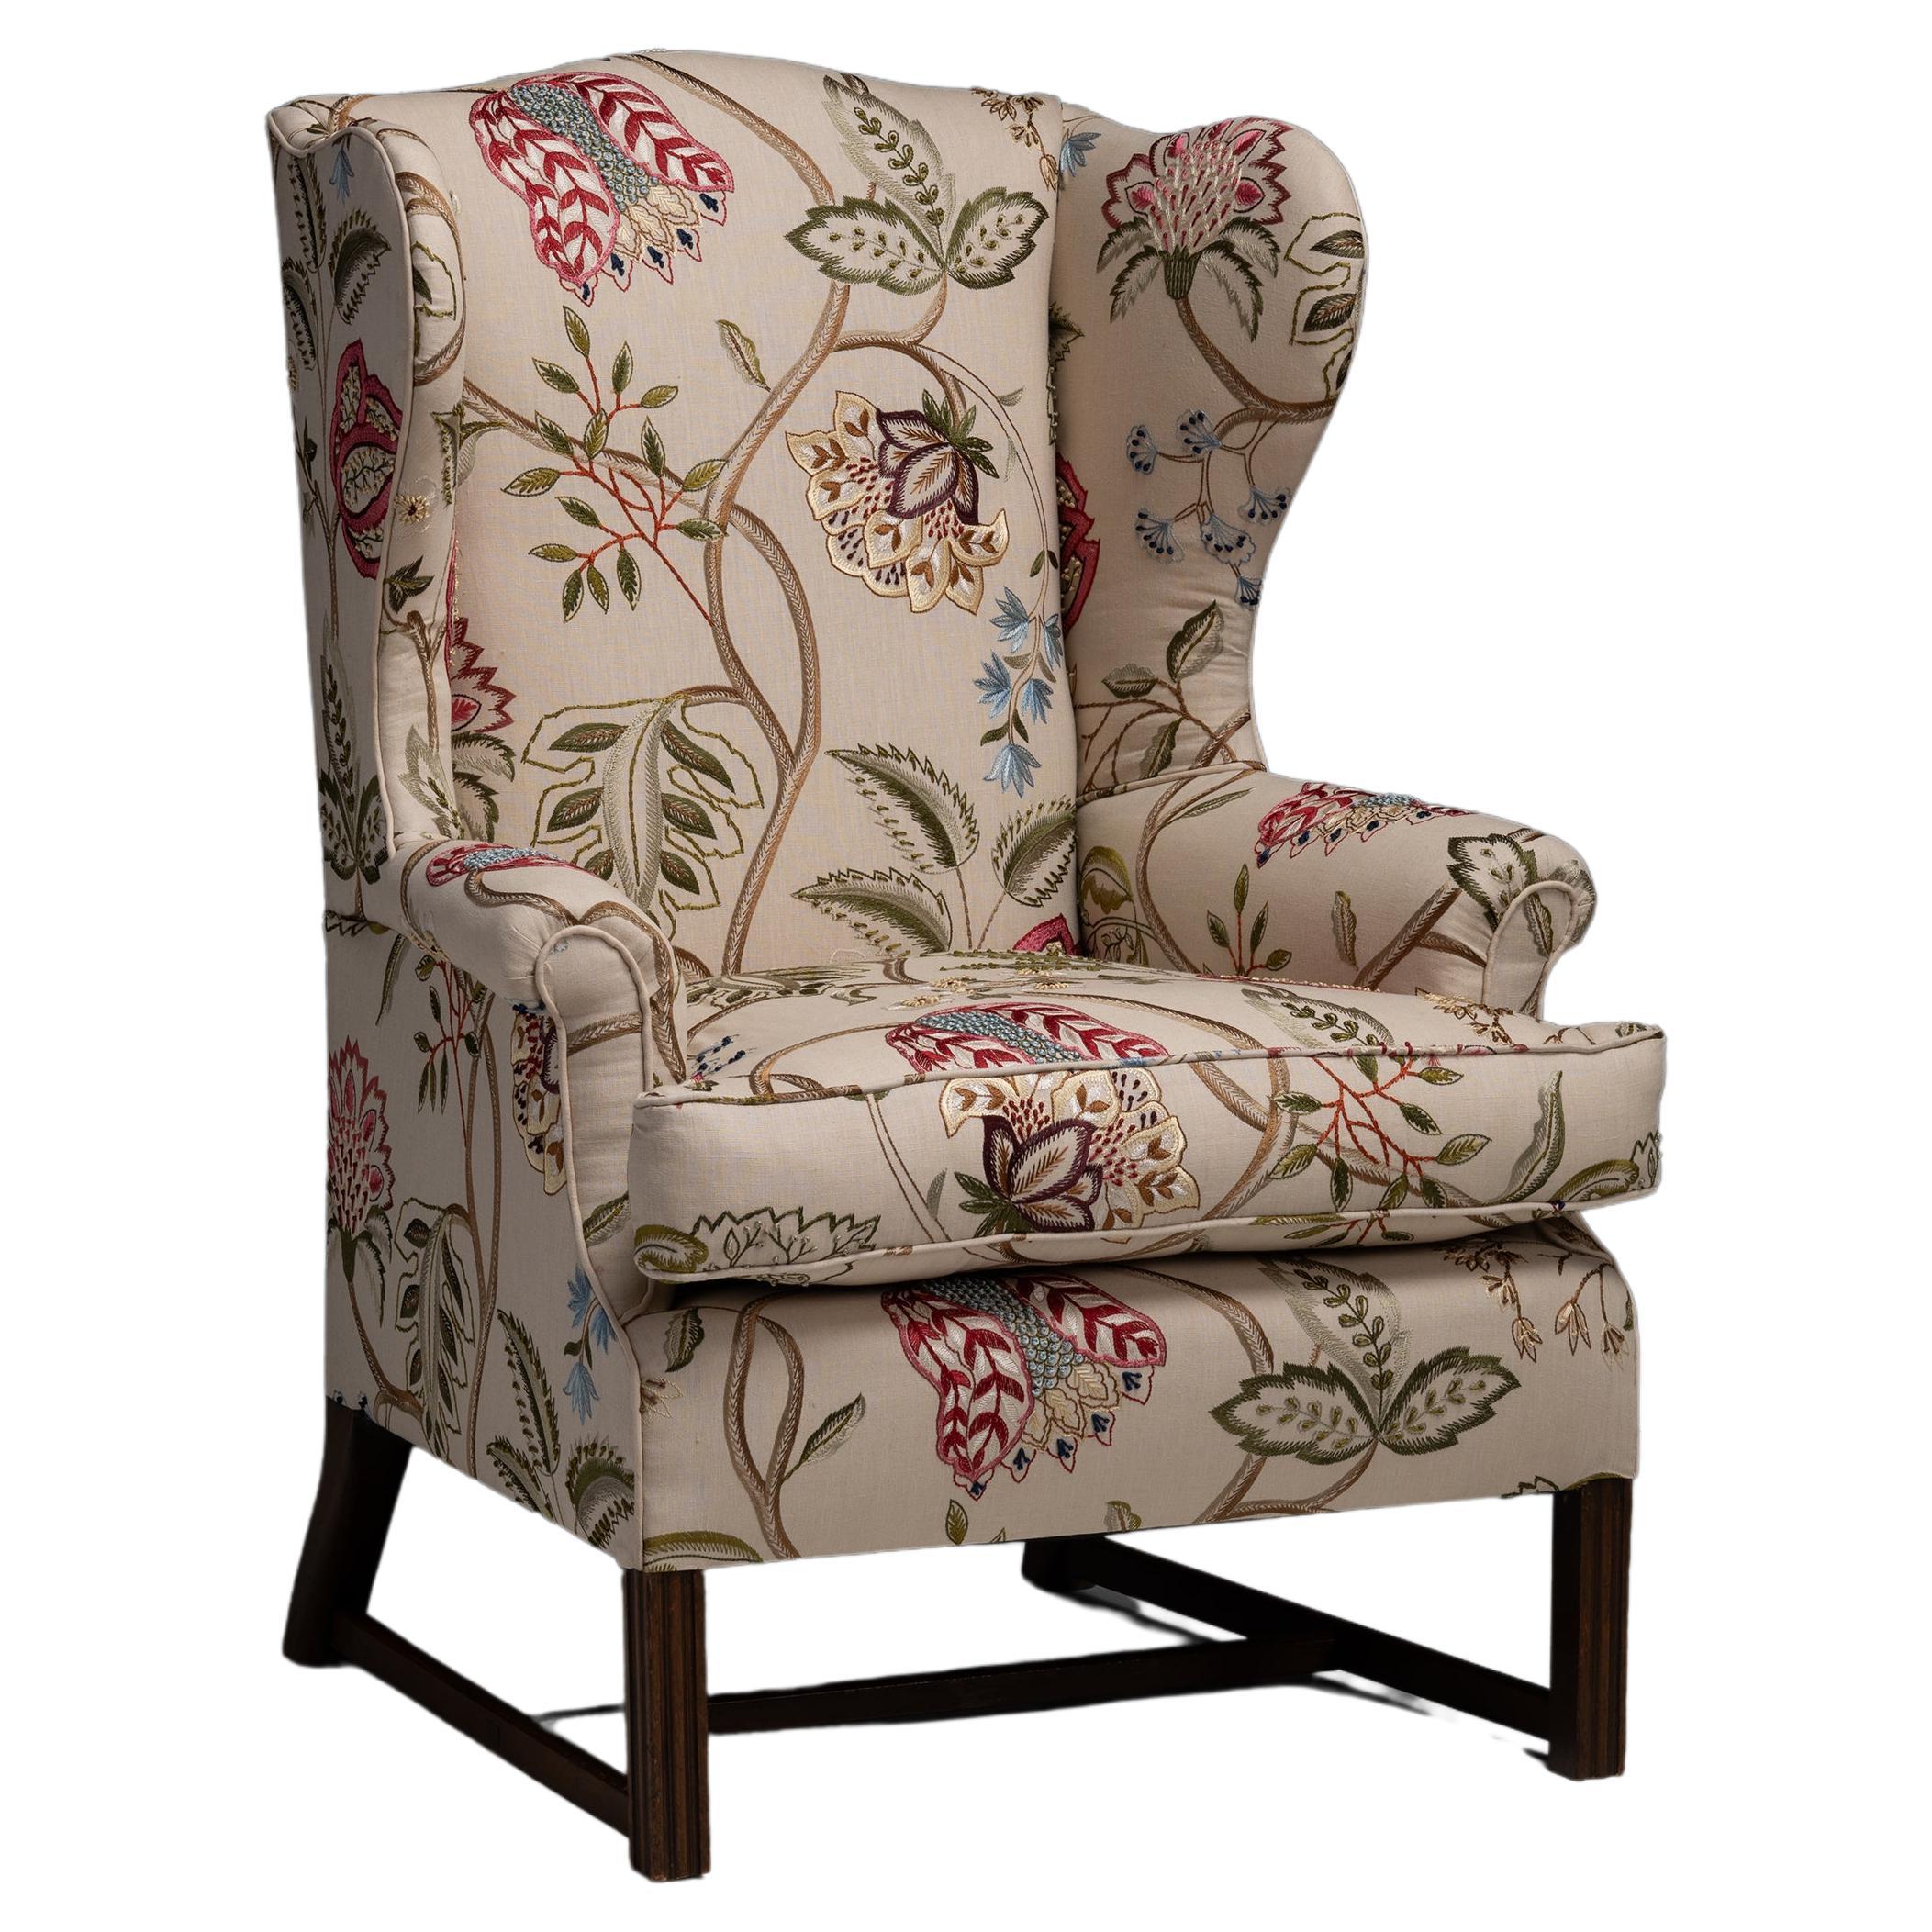 Wingback in Embroidered Linen by Pierre Frey, England circa 1890